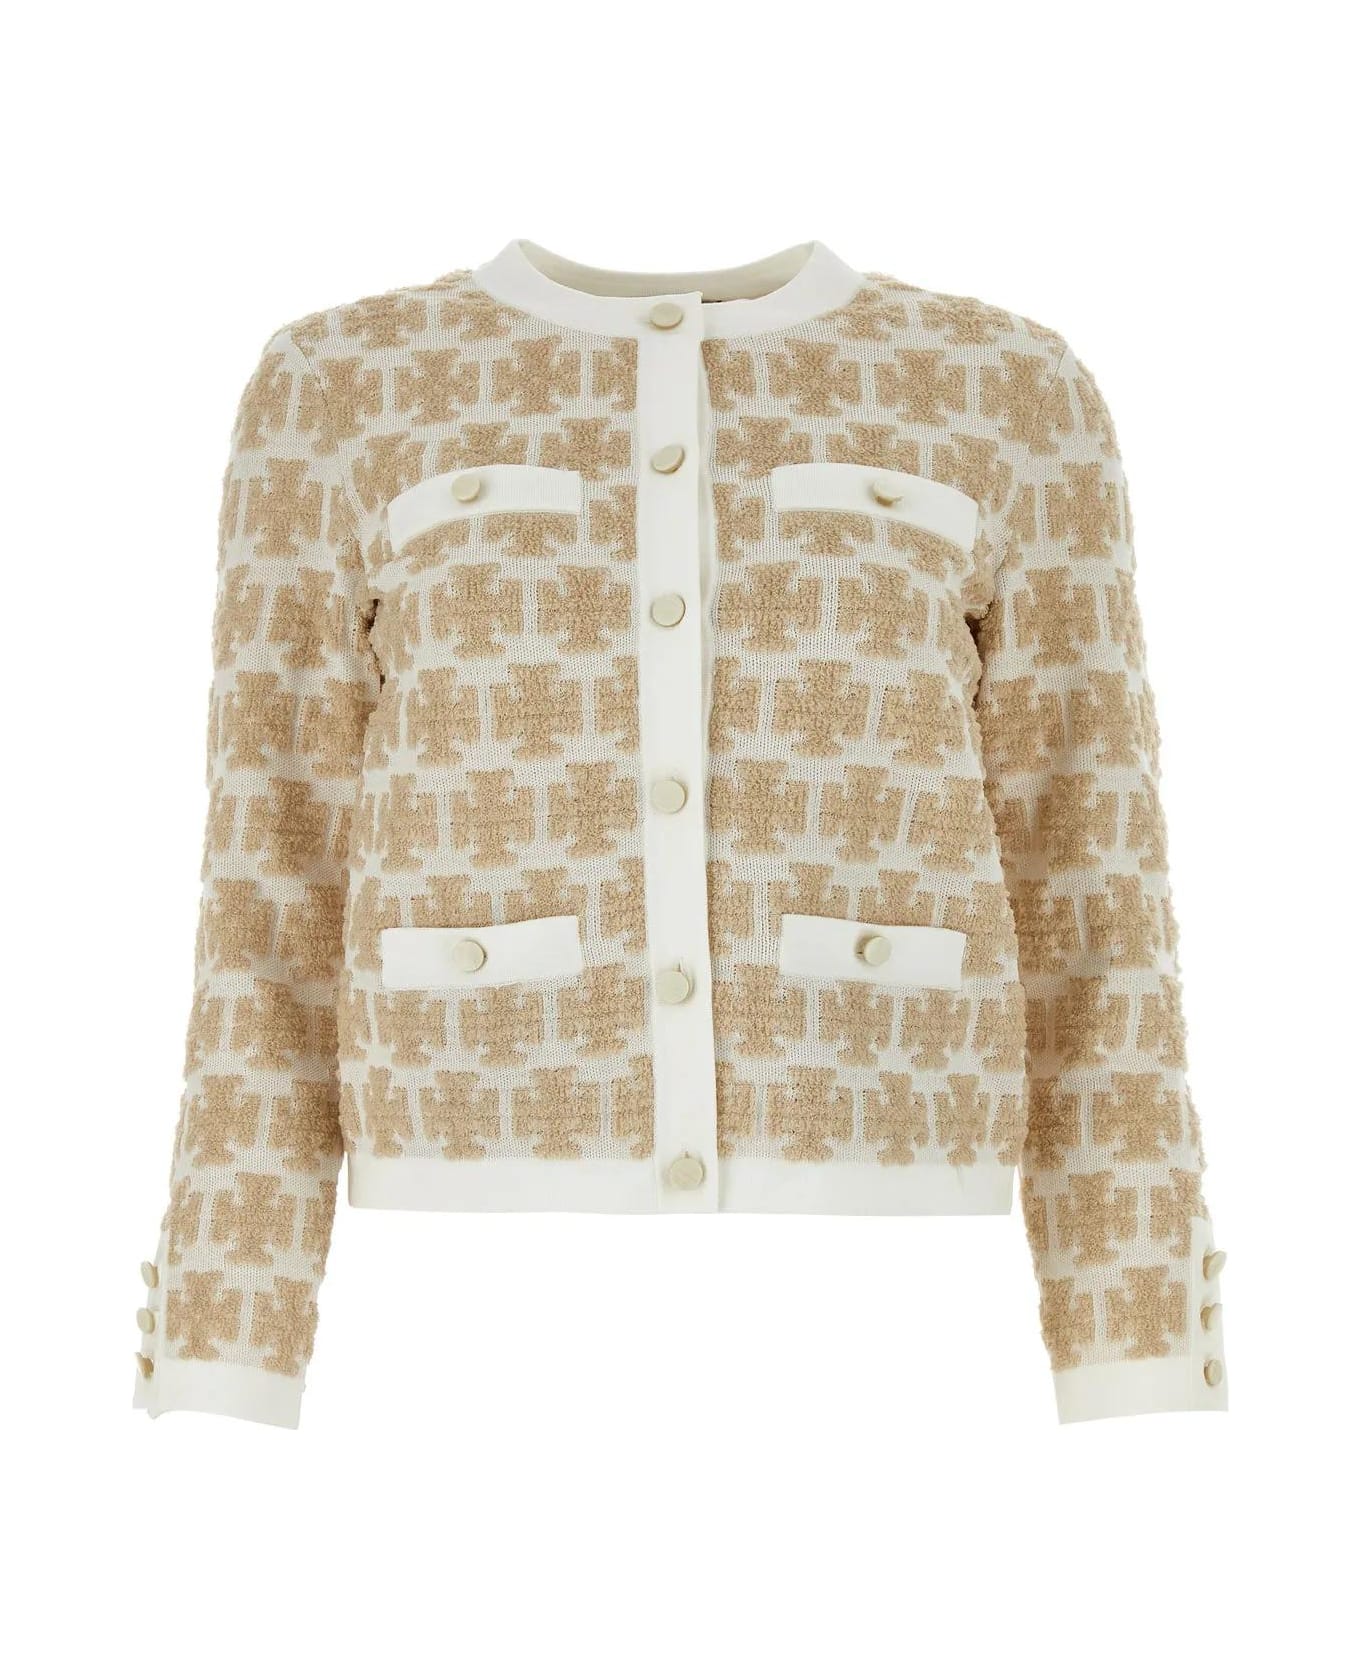 Tory Burch Embroidered Polyester Blend Cardigan - WHITE